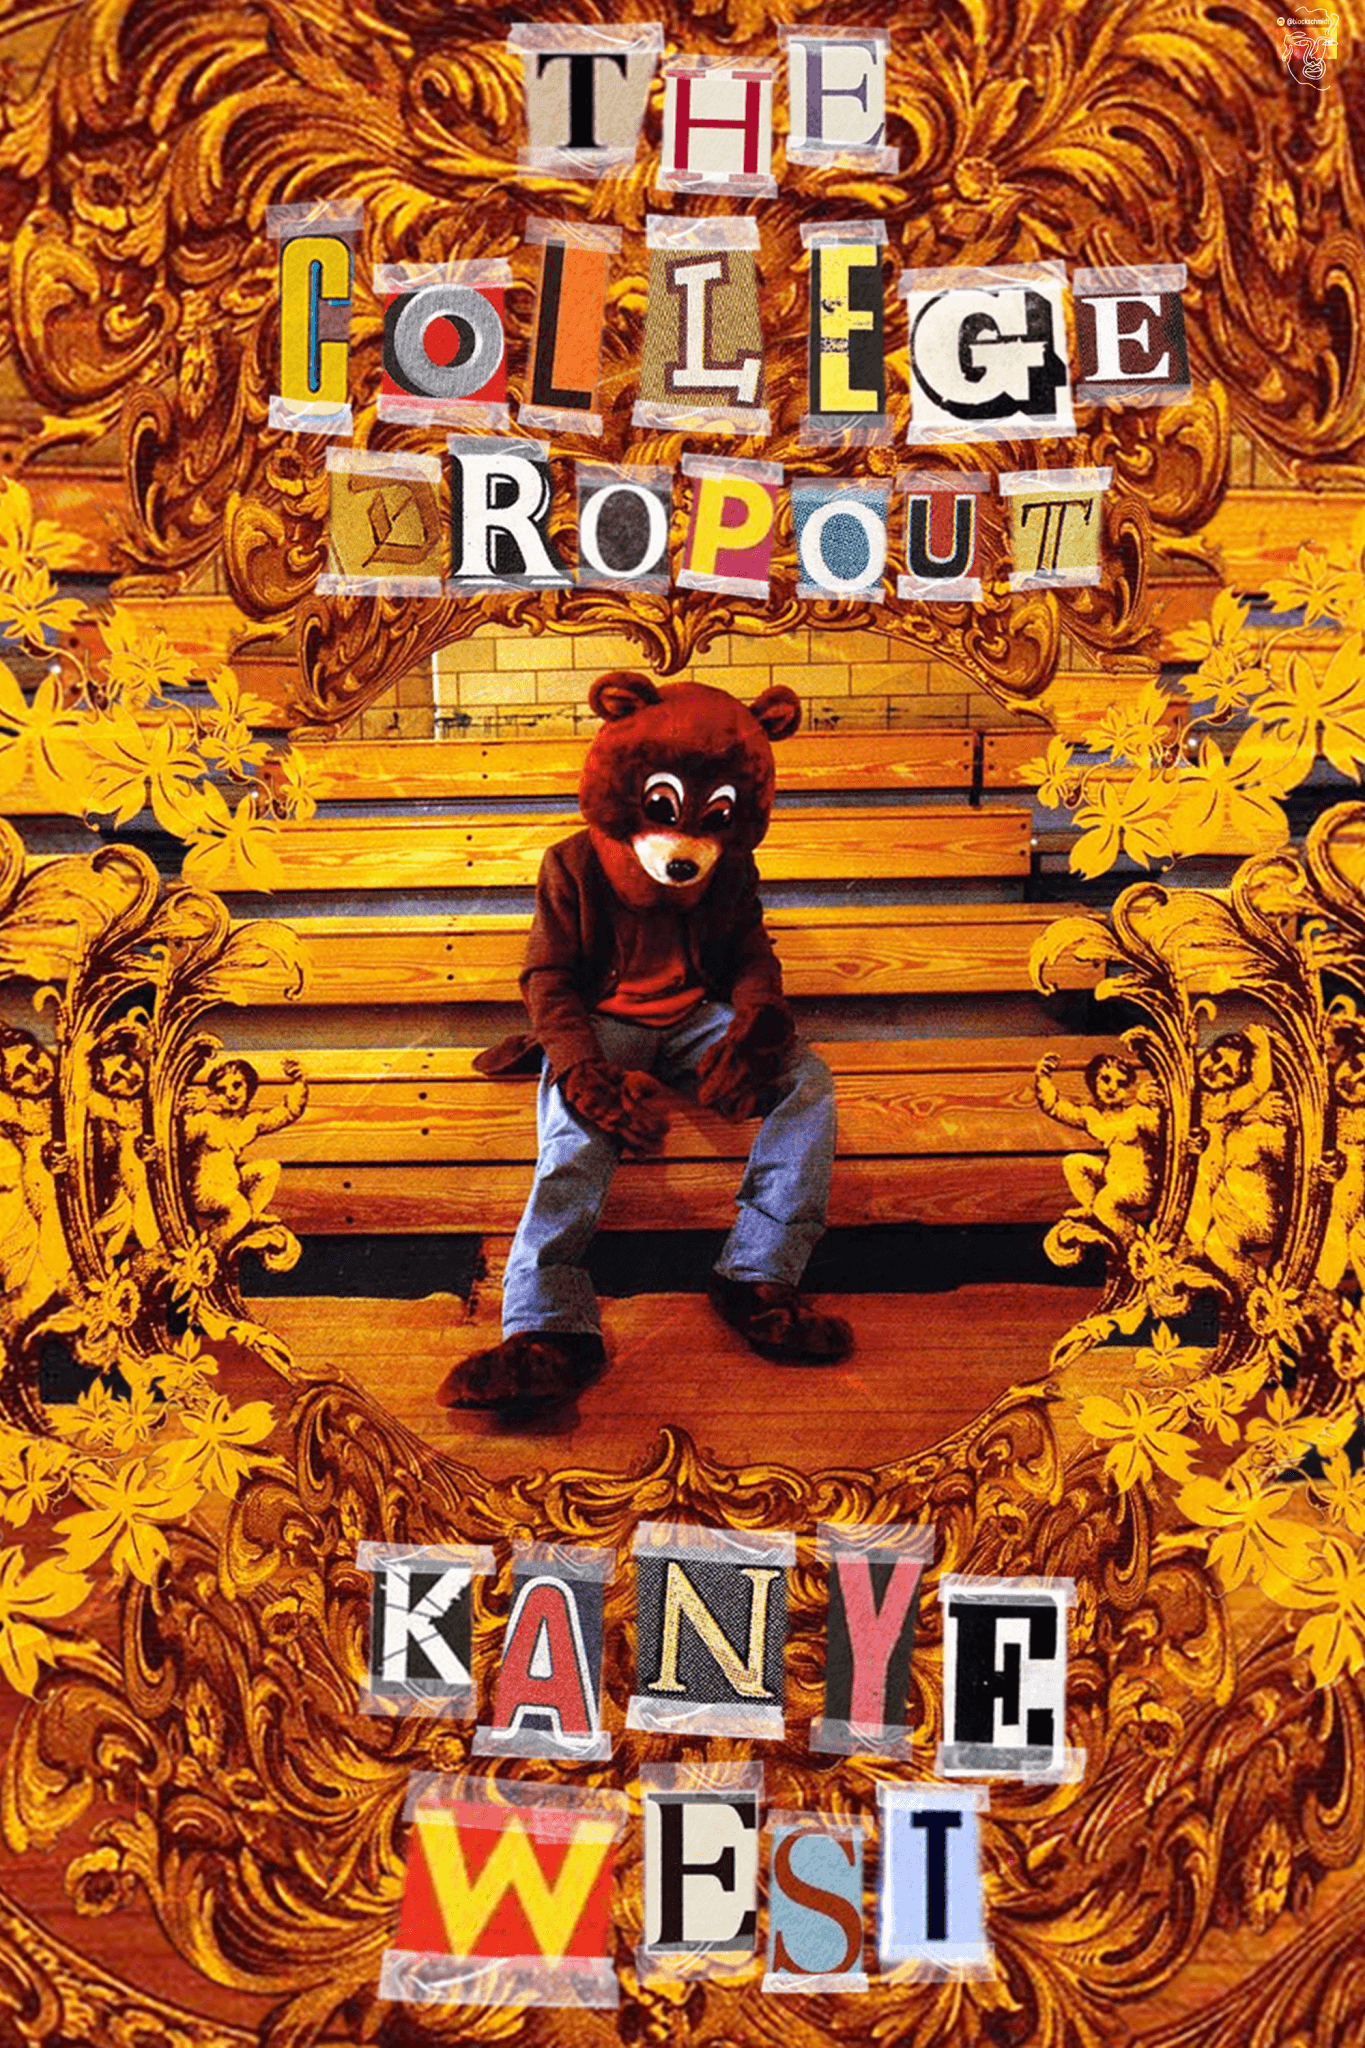 Kanye West x The College Dropout Poster - Posters Plug